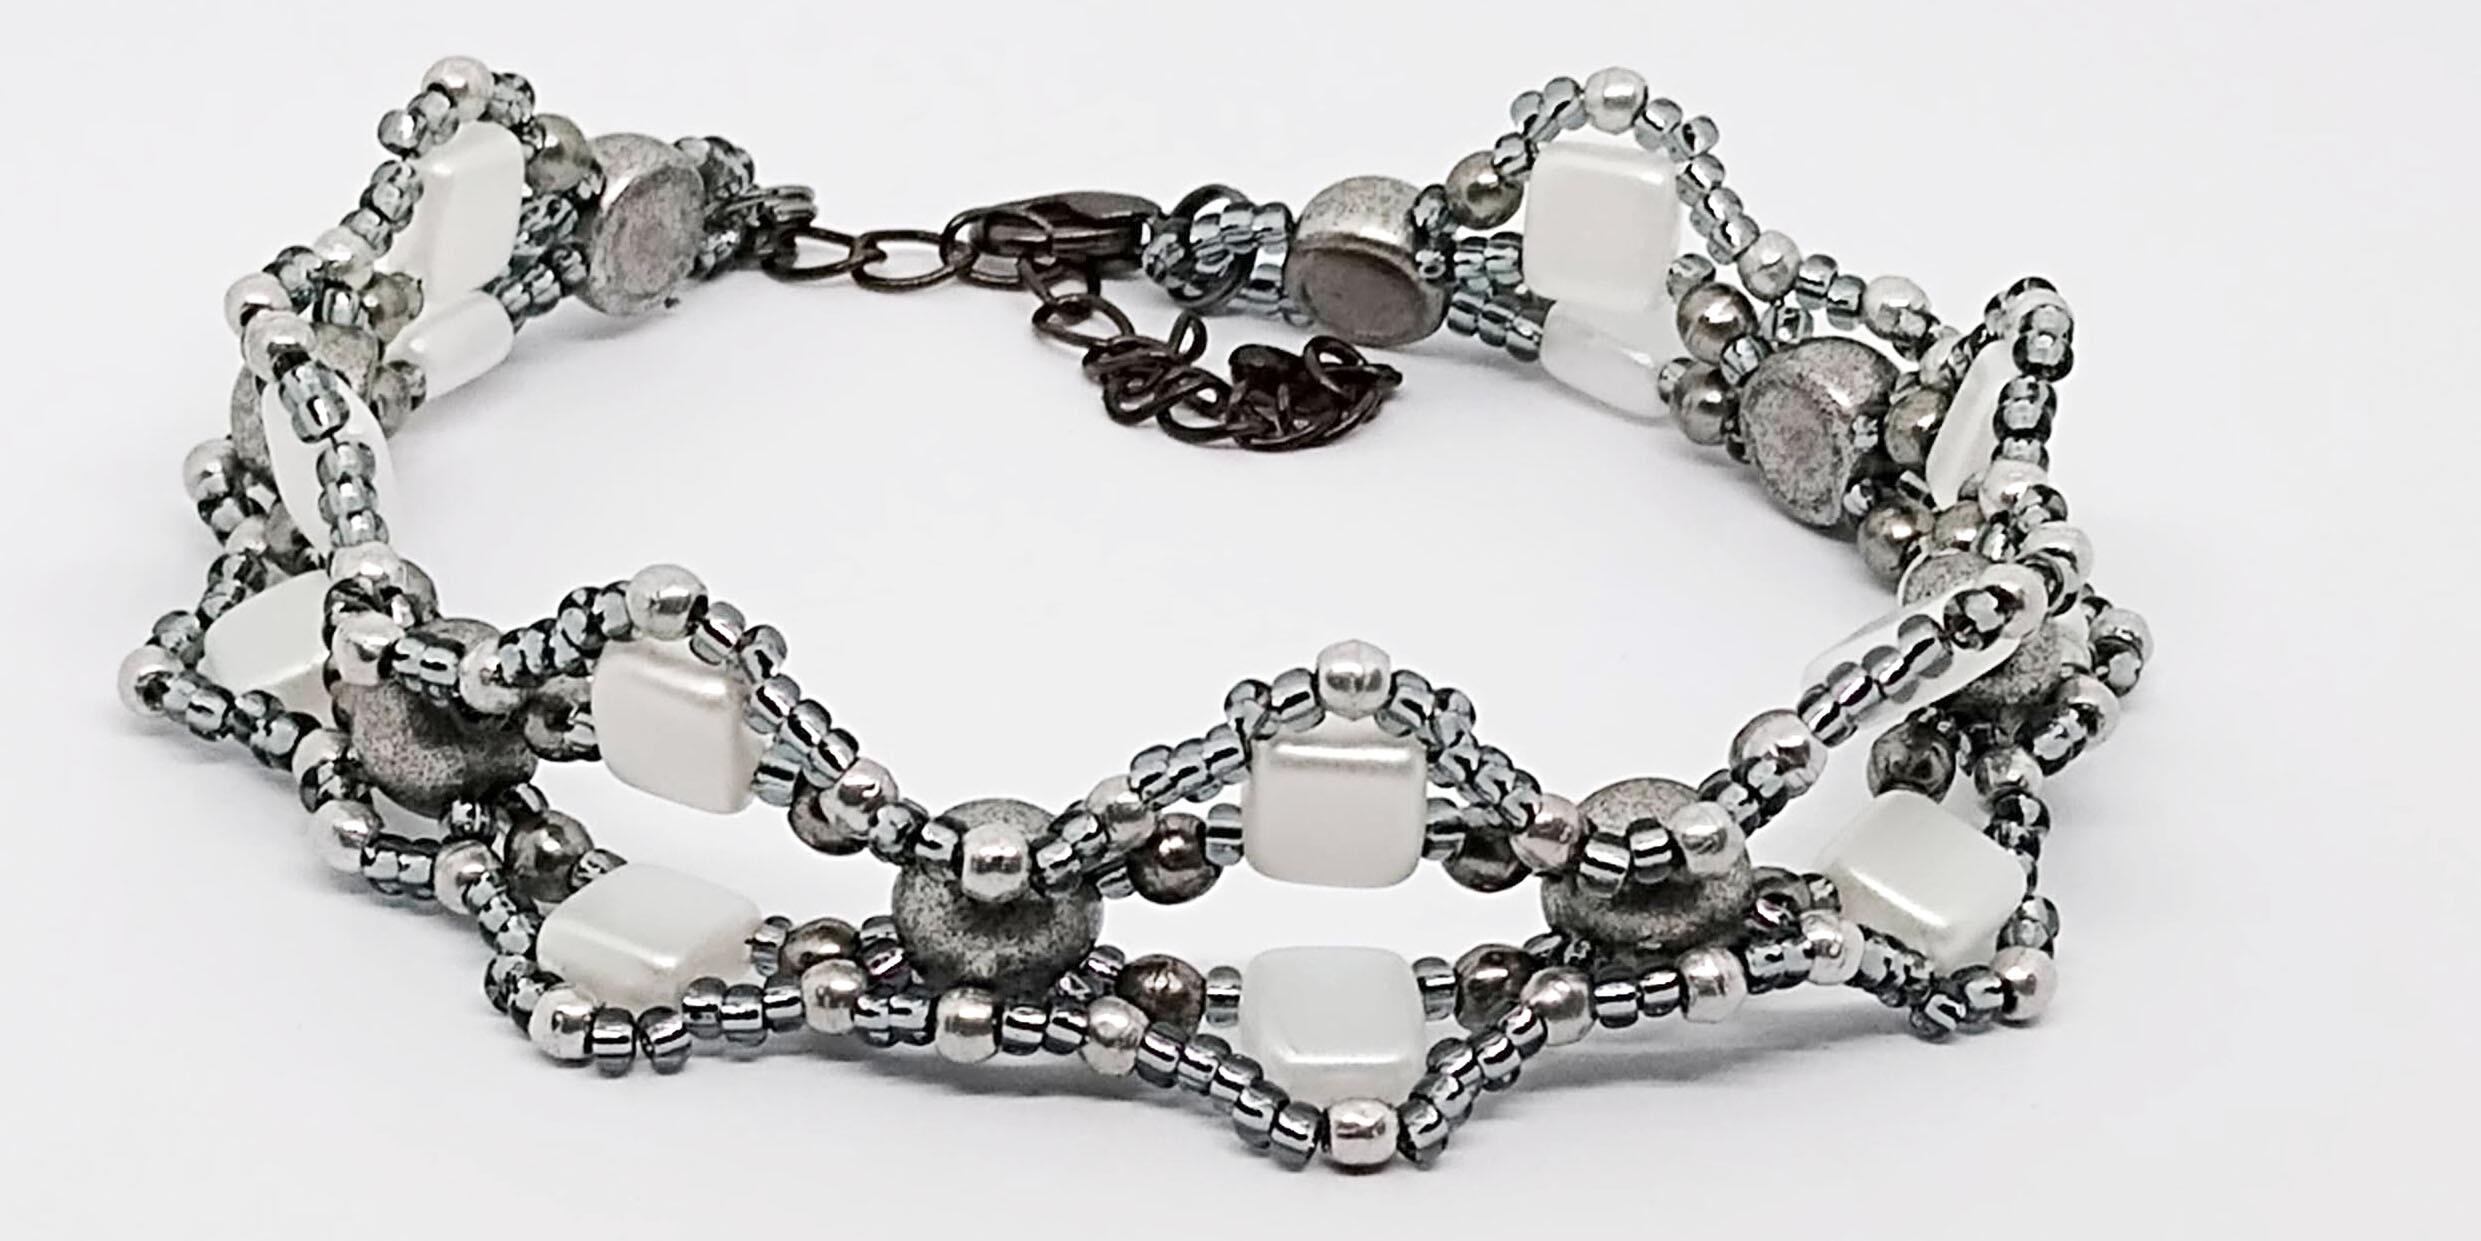 Tile Style Bracelet - White and Silvery Grey